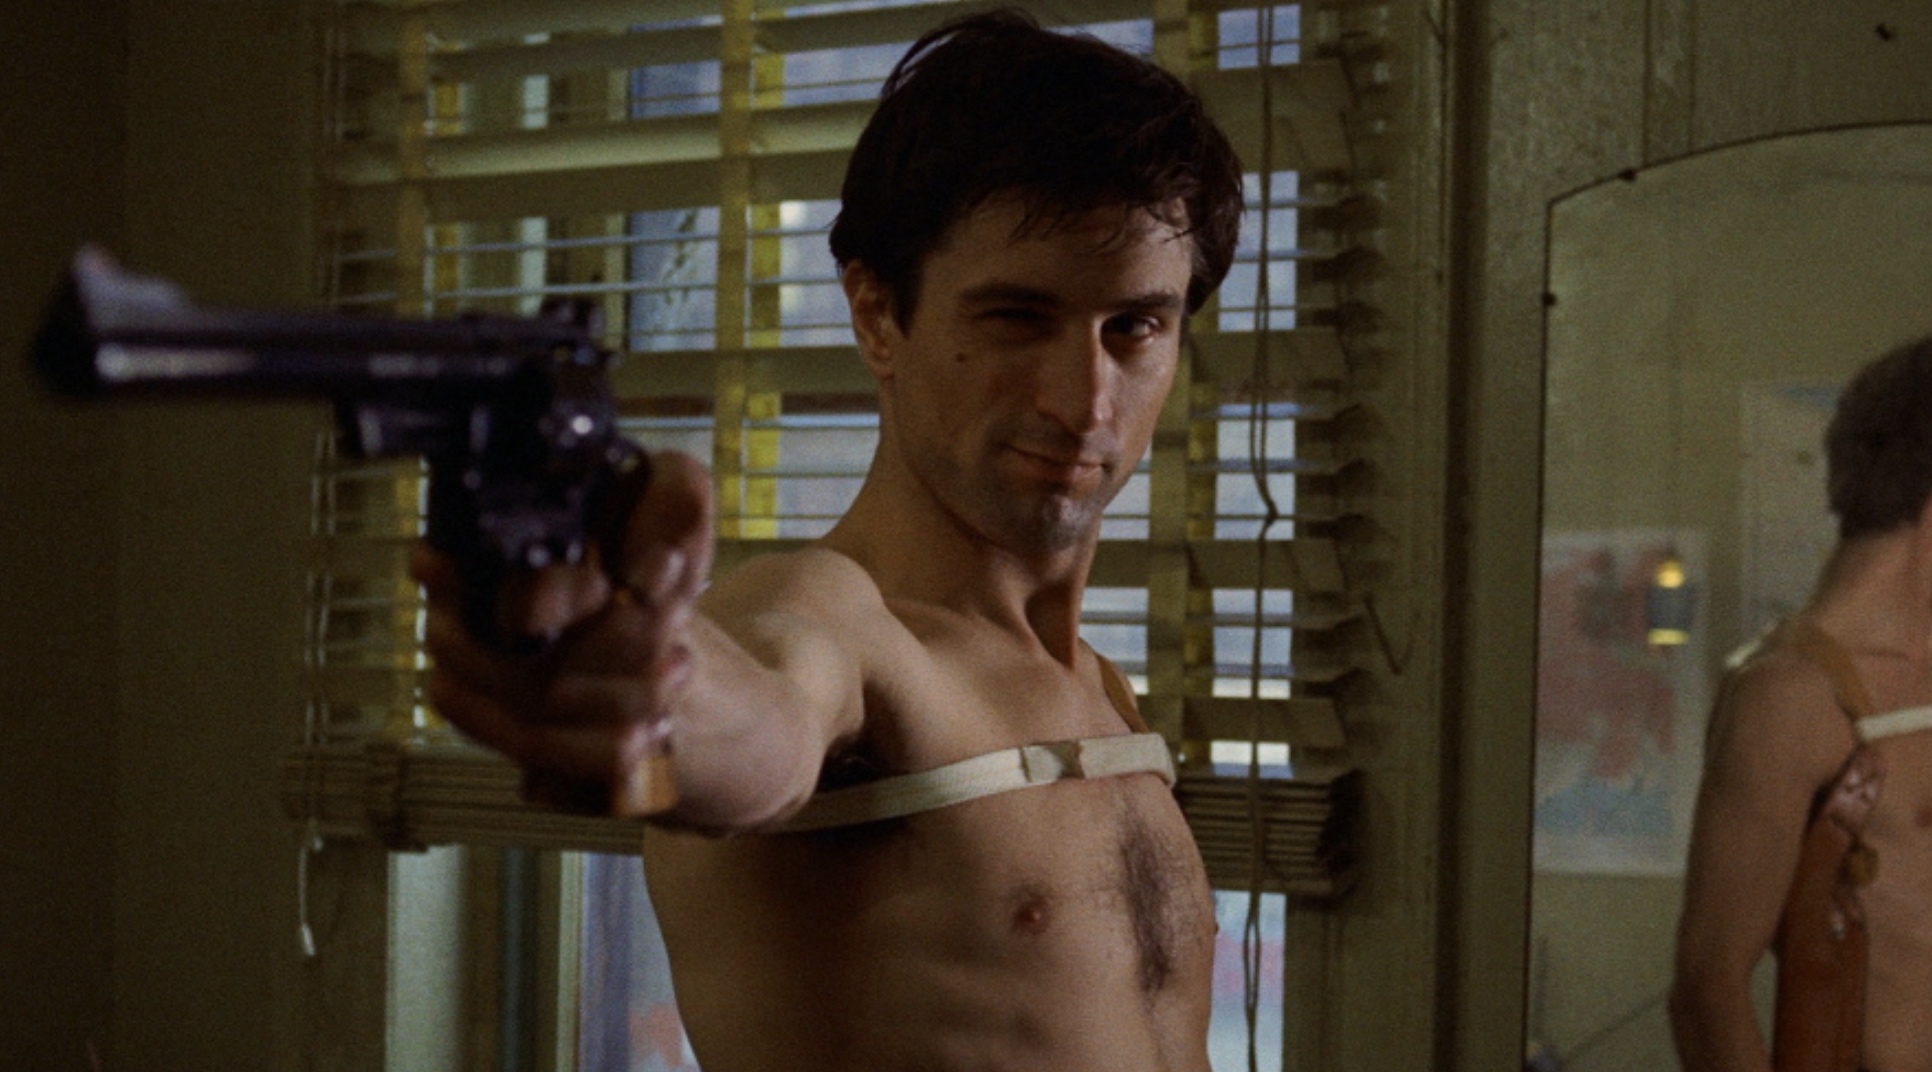 in what film before taxi driver 1976 did robert deniro play a cabdriver